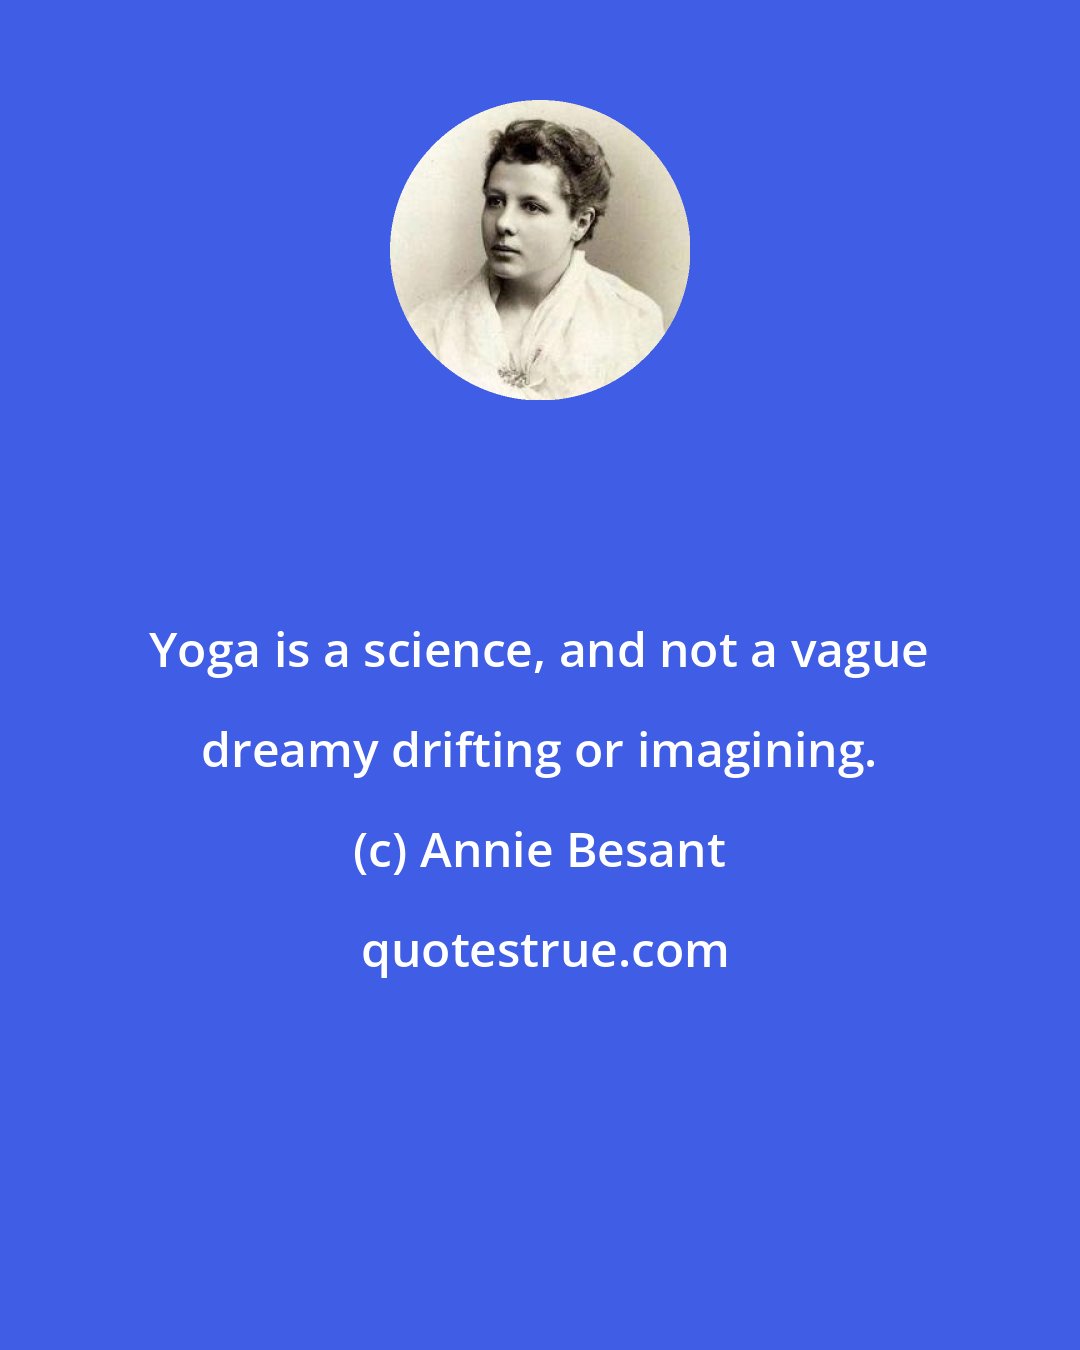 Annie Besant: Yoga is a science, and not a vague dreamy drifting or imagining.